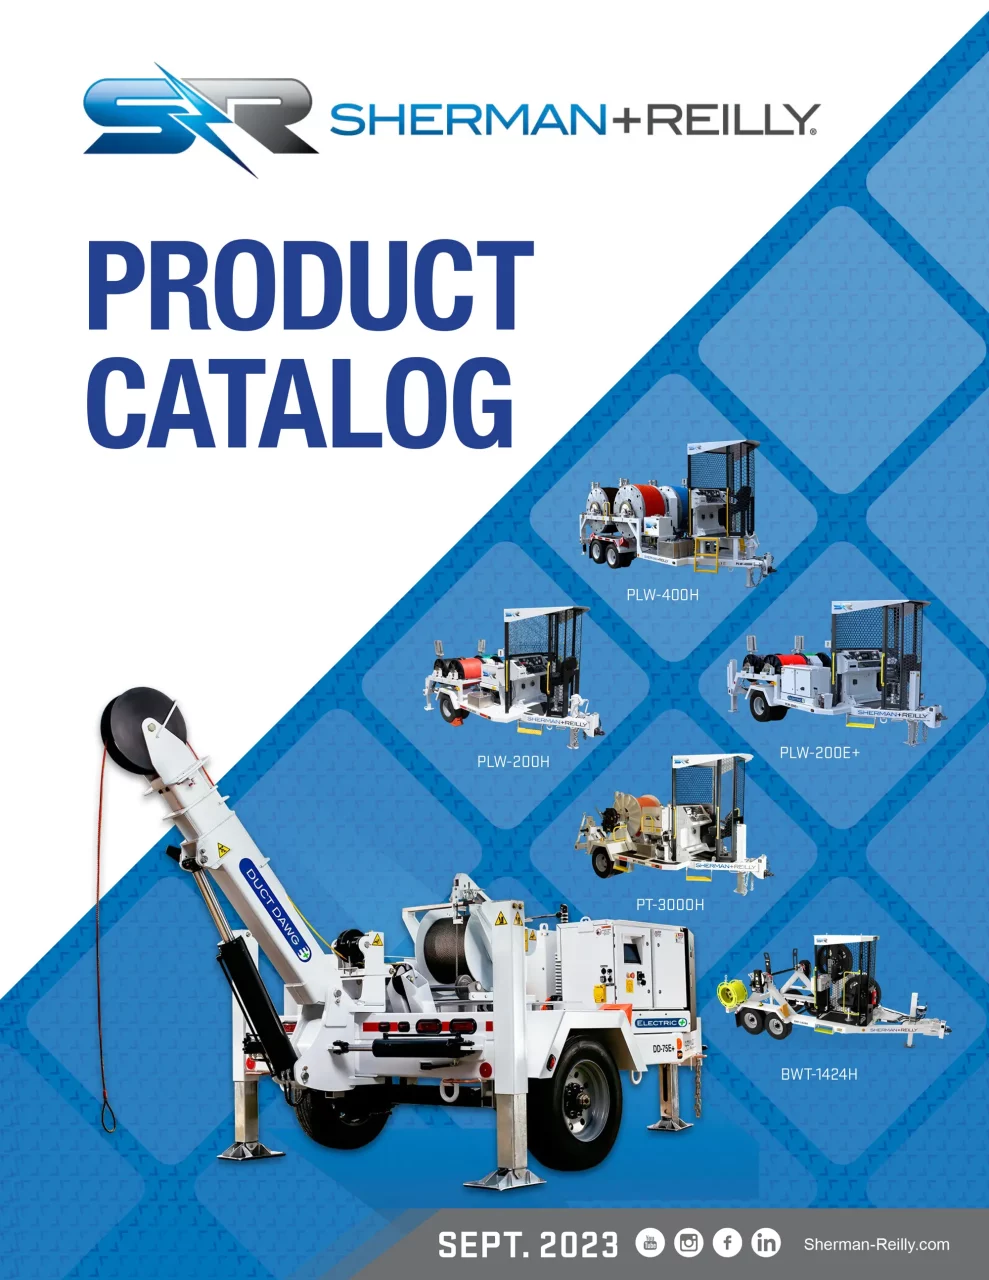 SR-Equipment-and-Blocks-Product-Catalog-2023-Cover